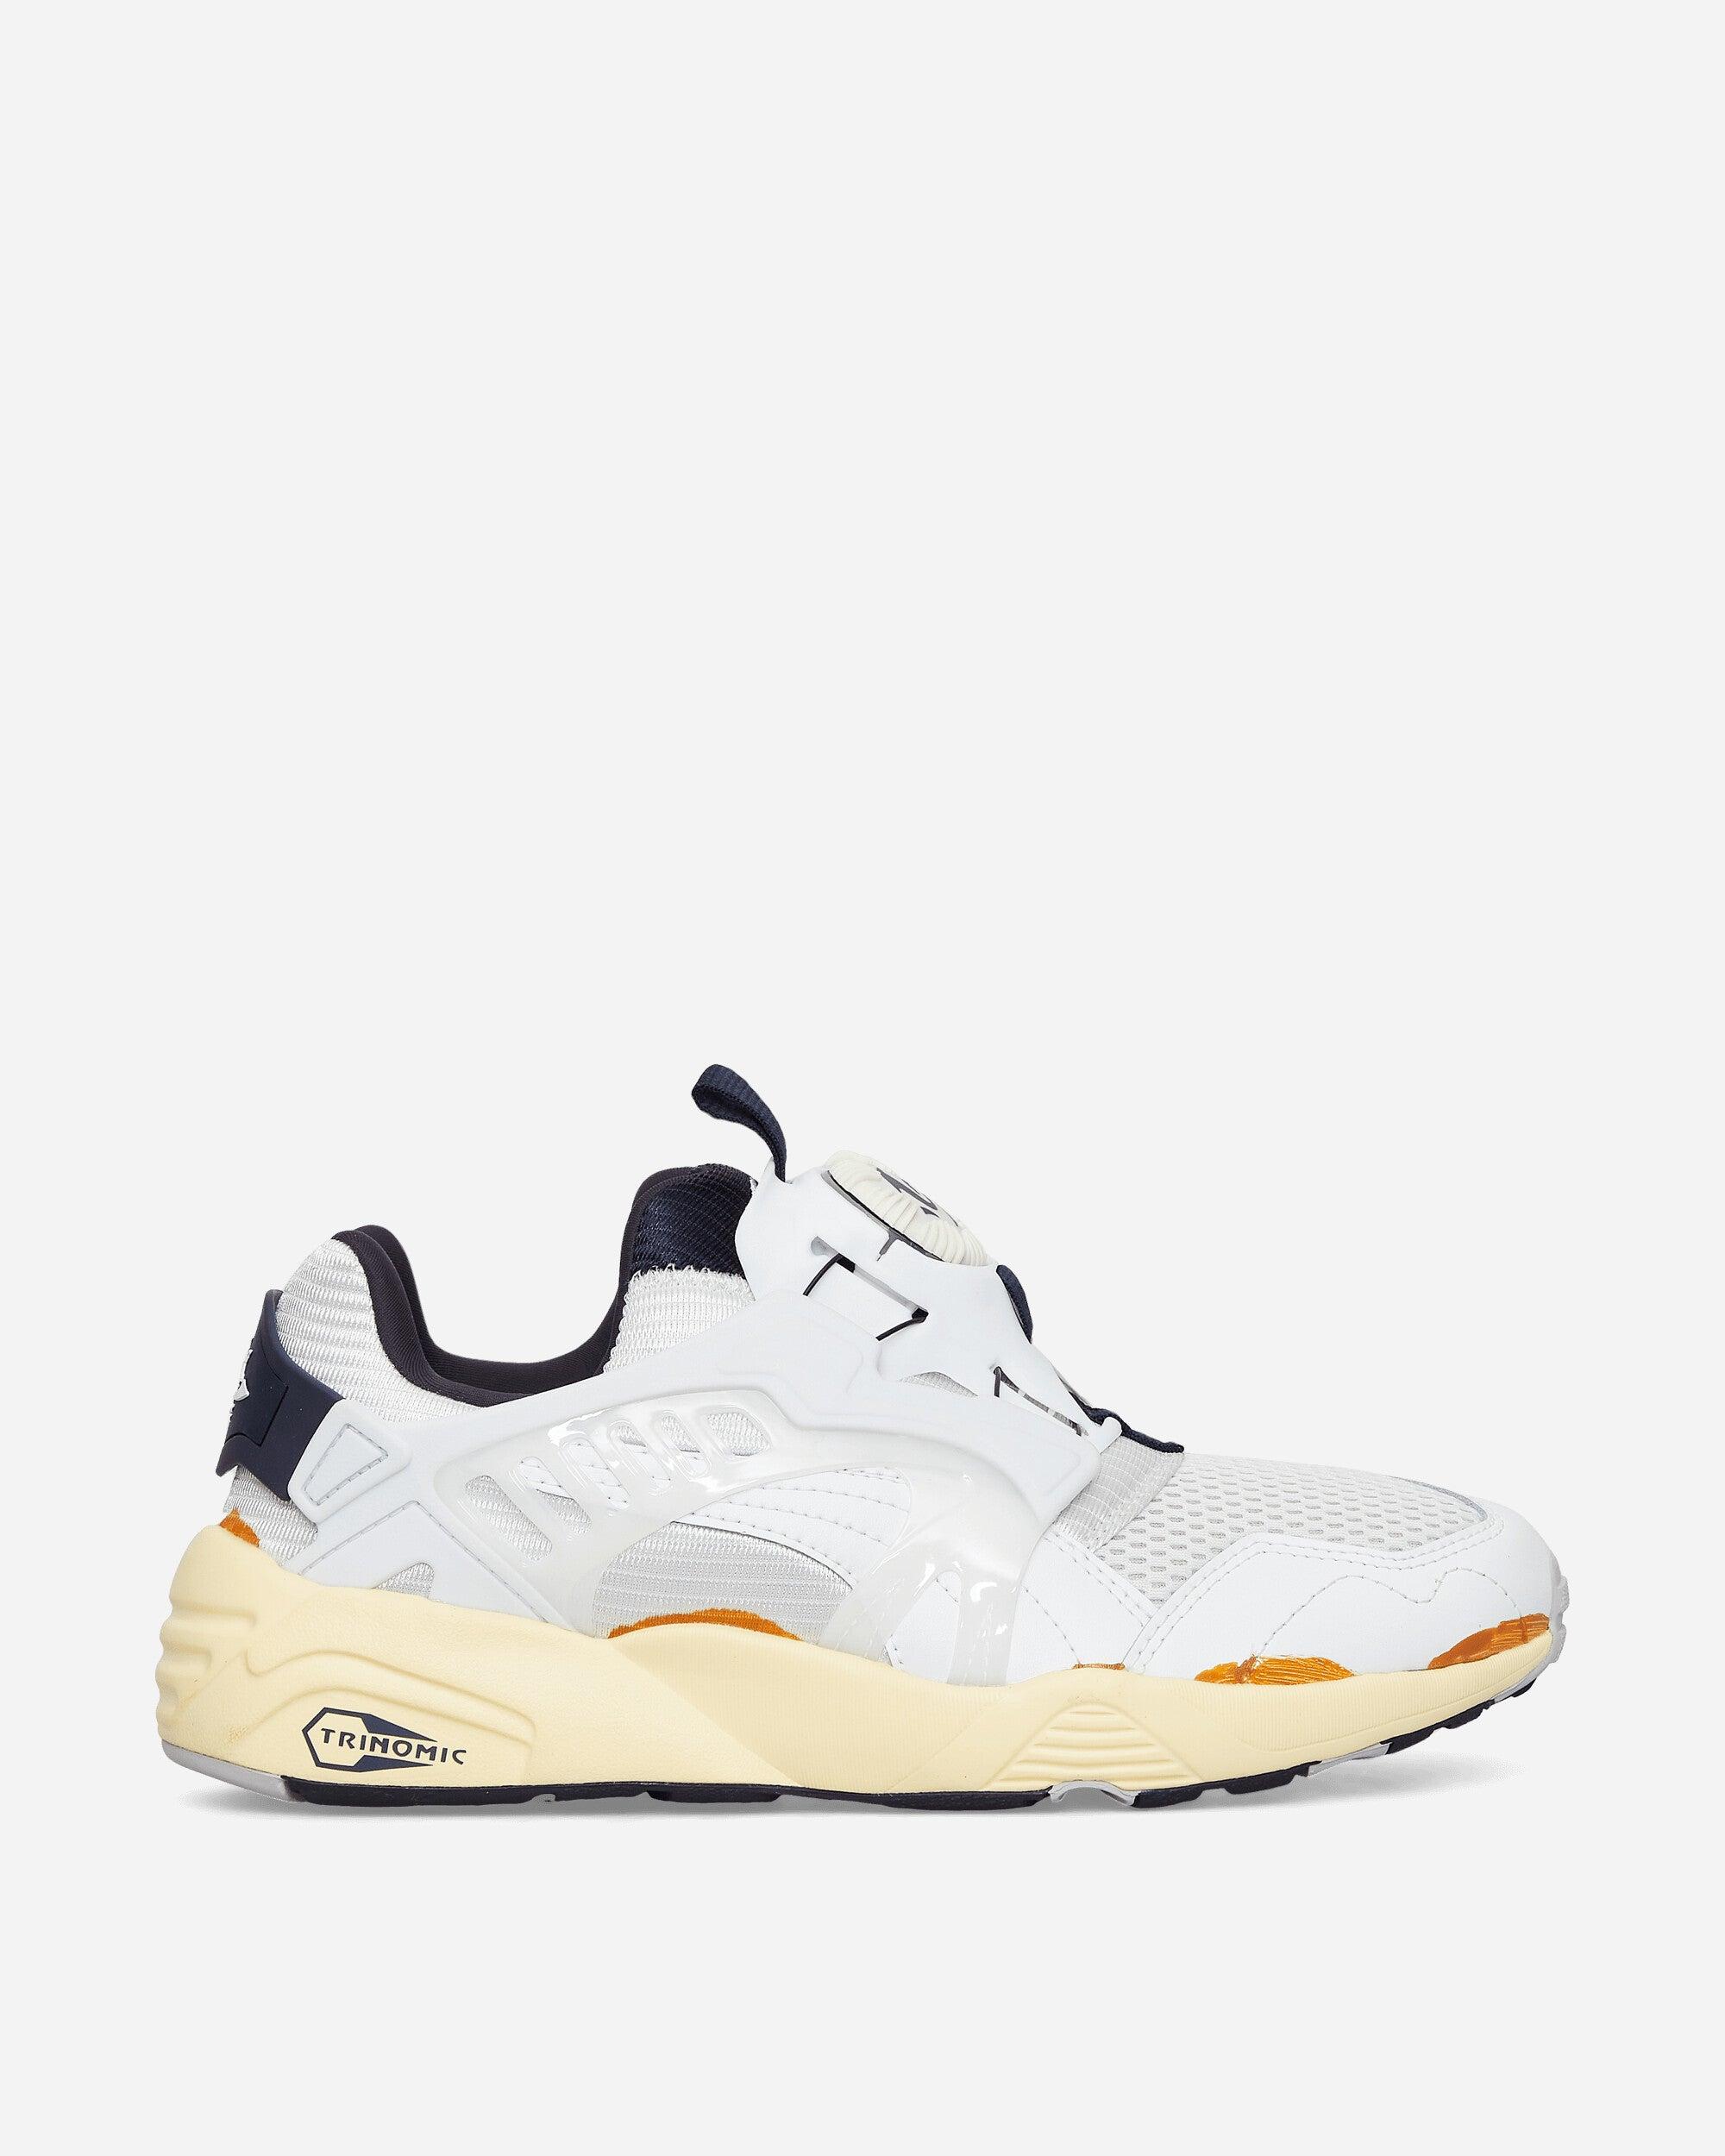 PUMA Disc Blaze "the Never Worn" Ii Sneakers White for Men | Lyst